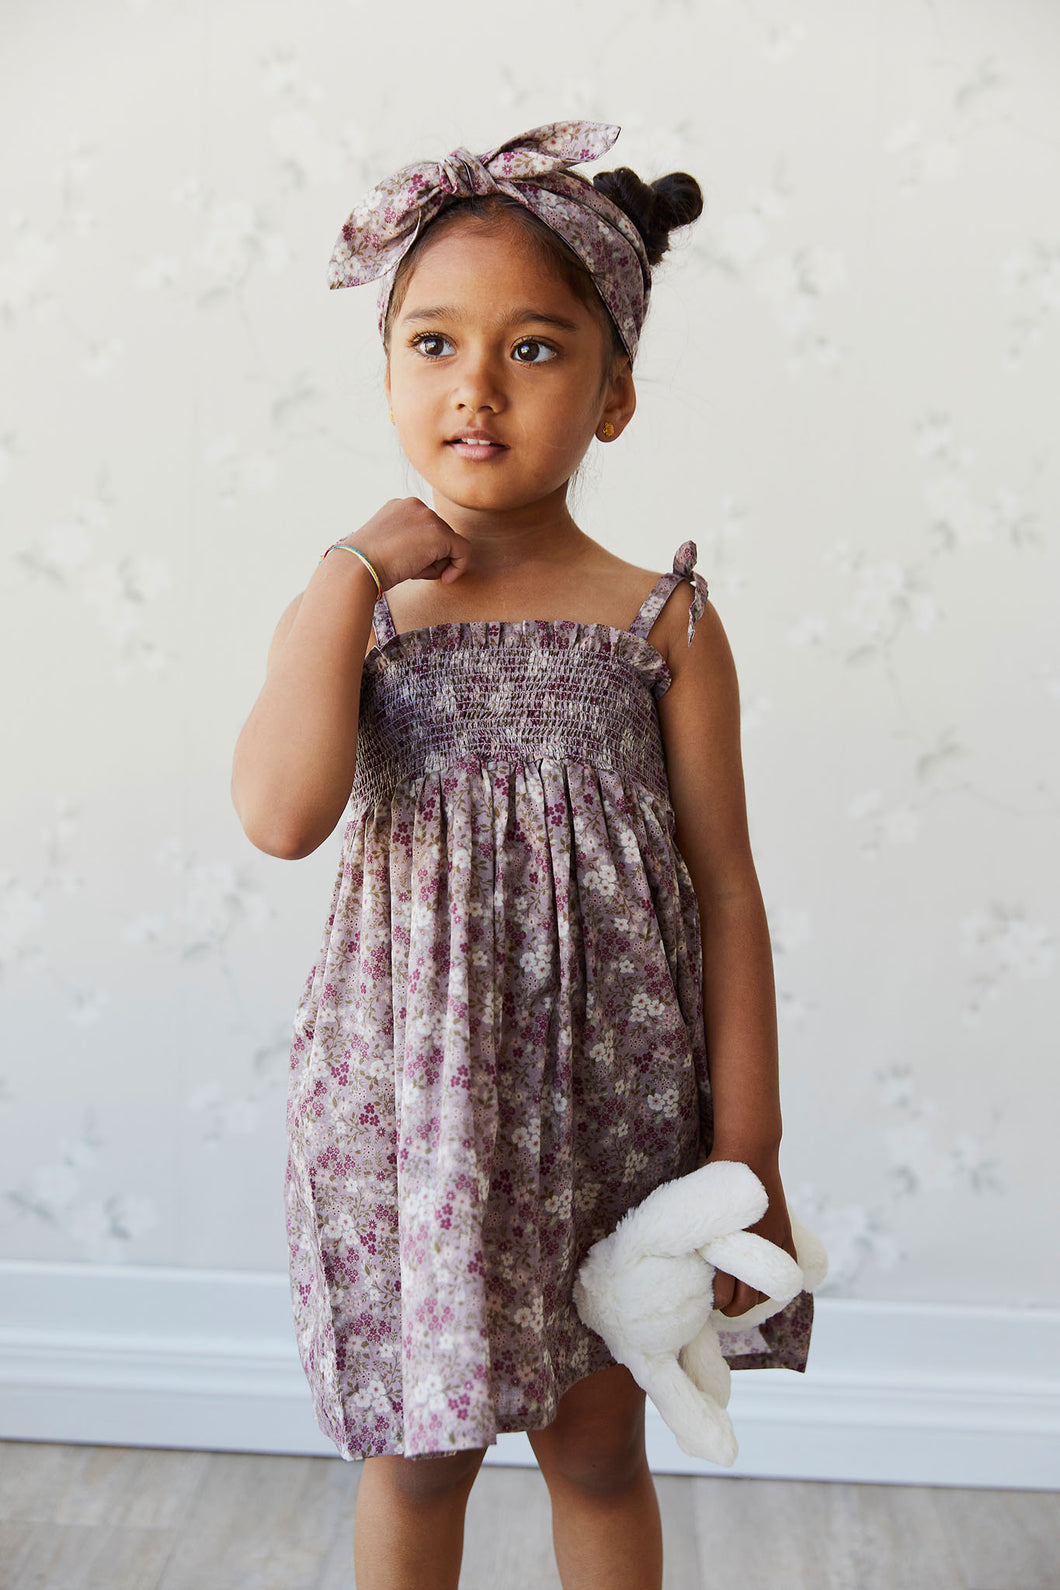 Organic Cotton Eveleigh Dress | Pansy Floral Fawn SIZE 6-12M, 1YR, 3YR and 4YR